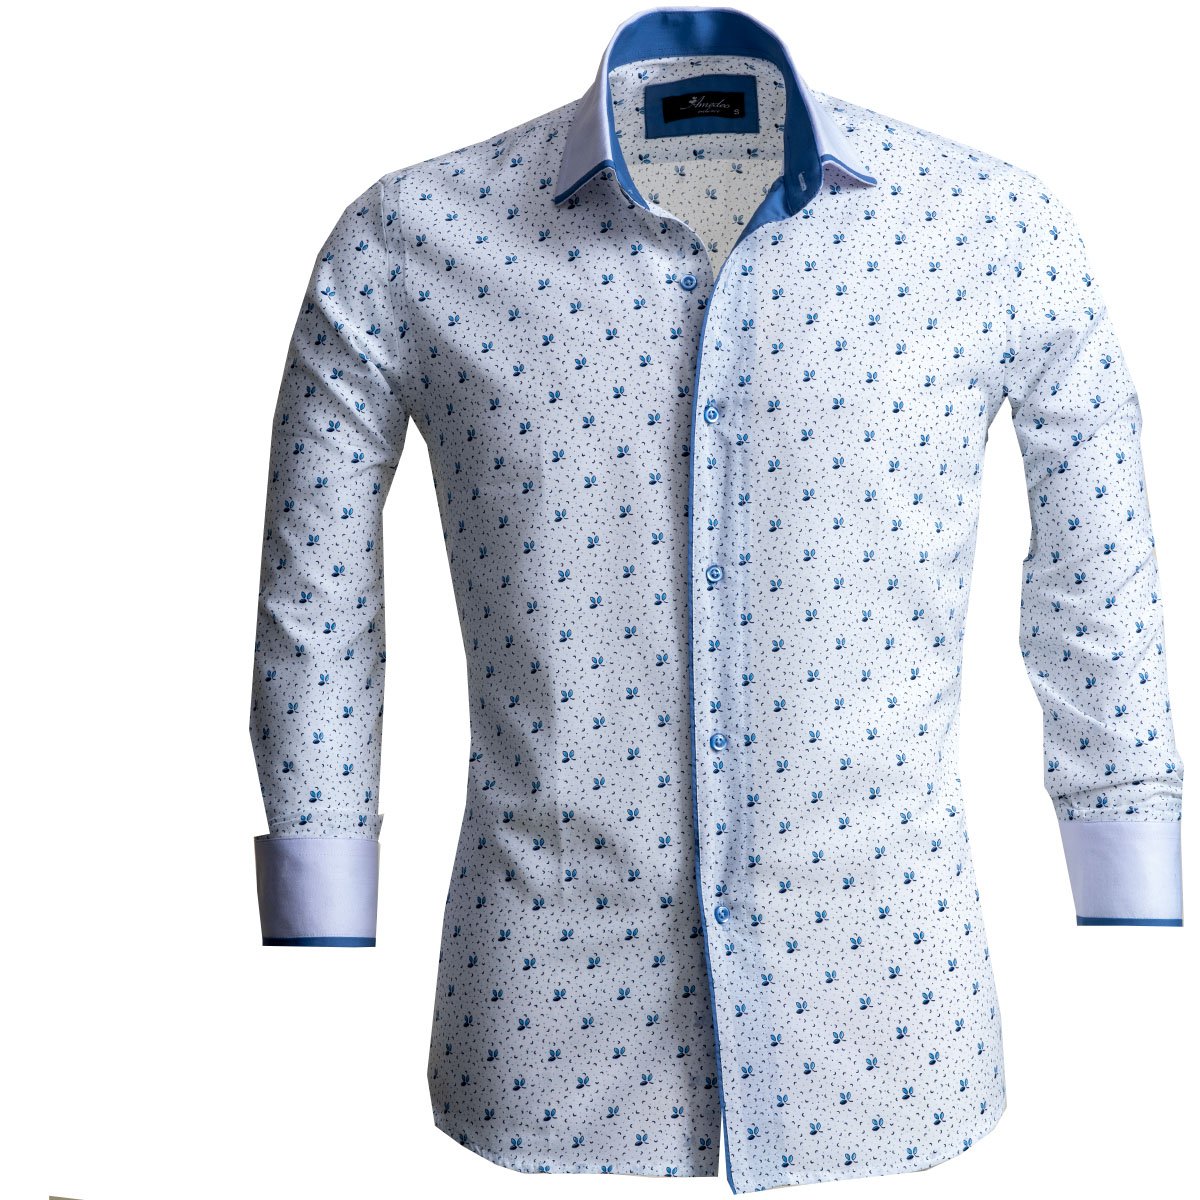 White & Light Blue Mens Slim Fit Designer Dress Shirt - tailored Cotton Shirts for Work and Casual - Amedeo Exclusive